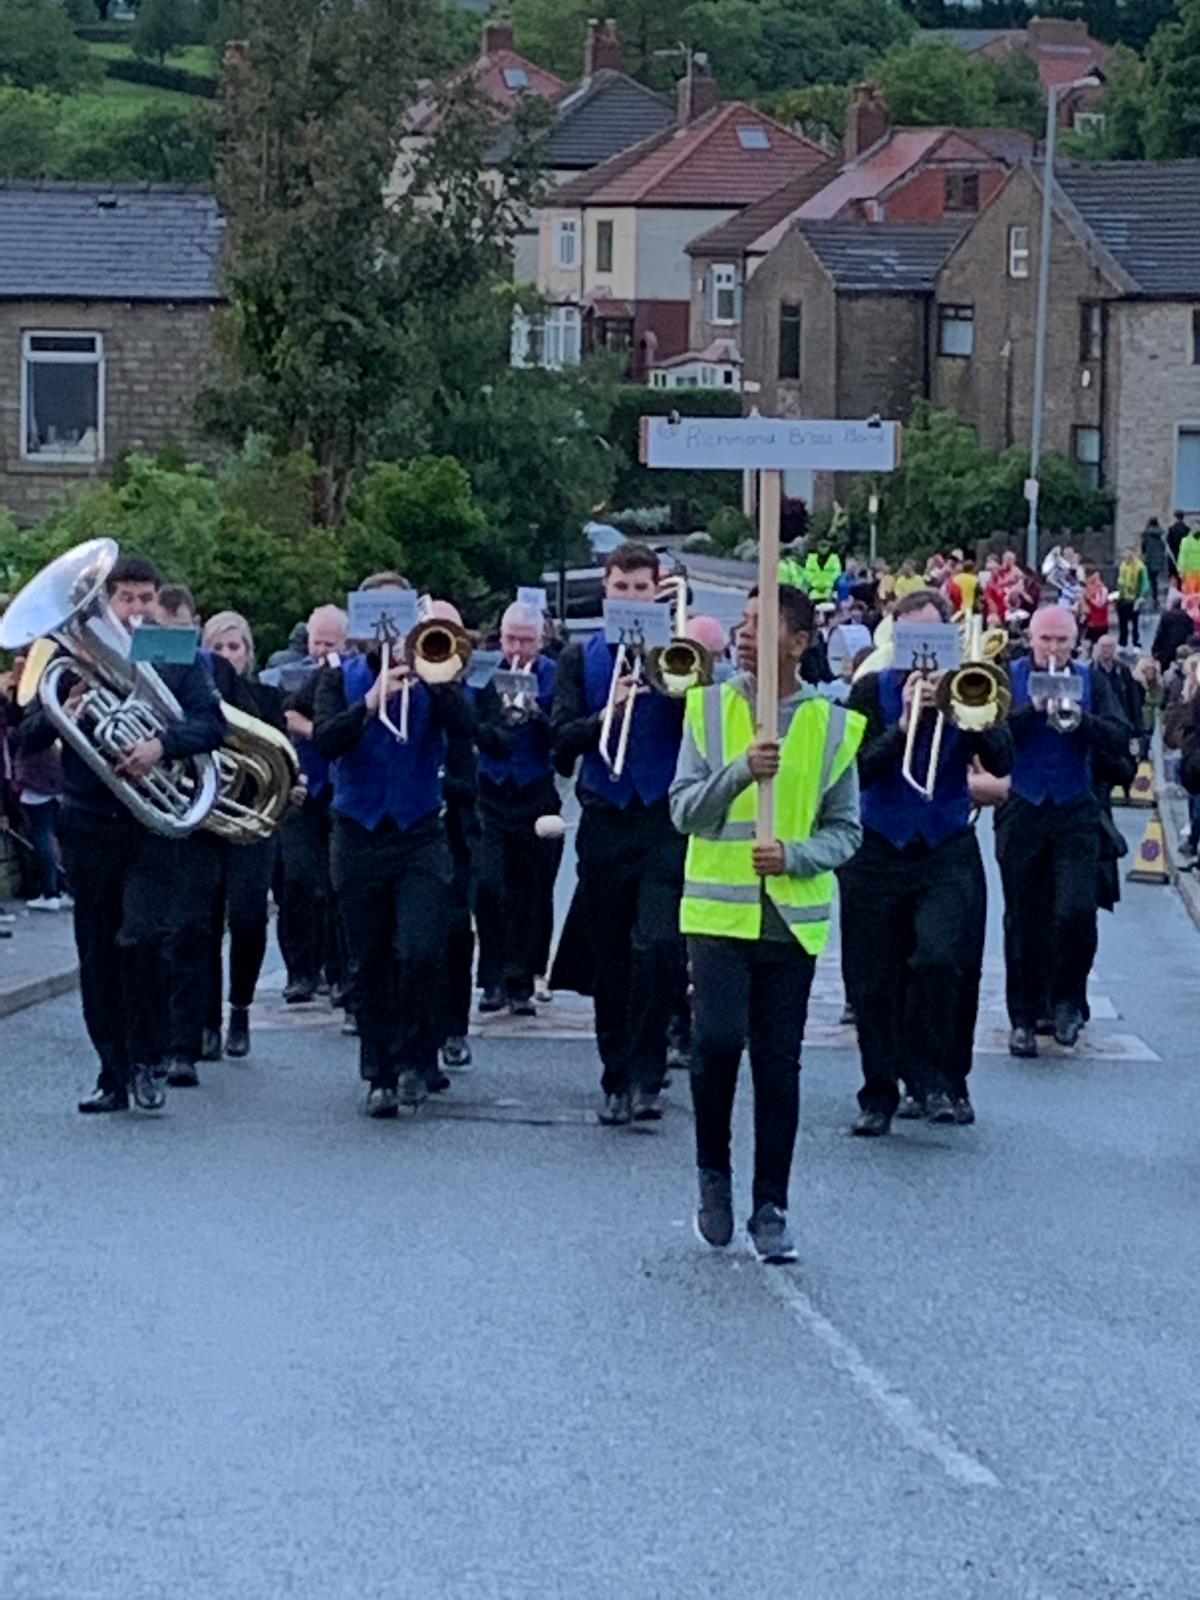 Richmond Brass Band marching up the hill at Lydgate